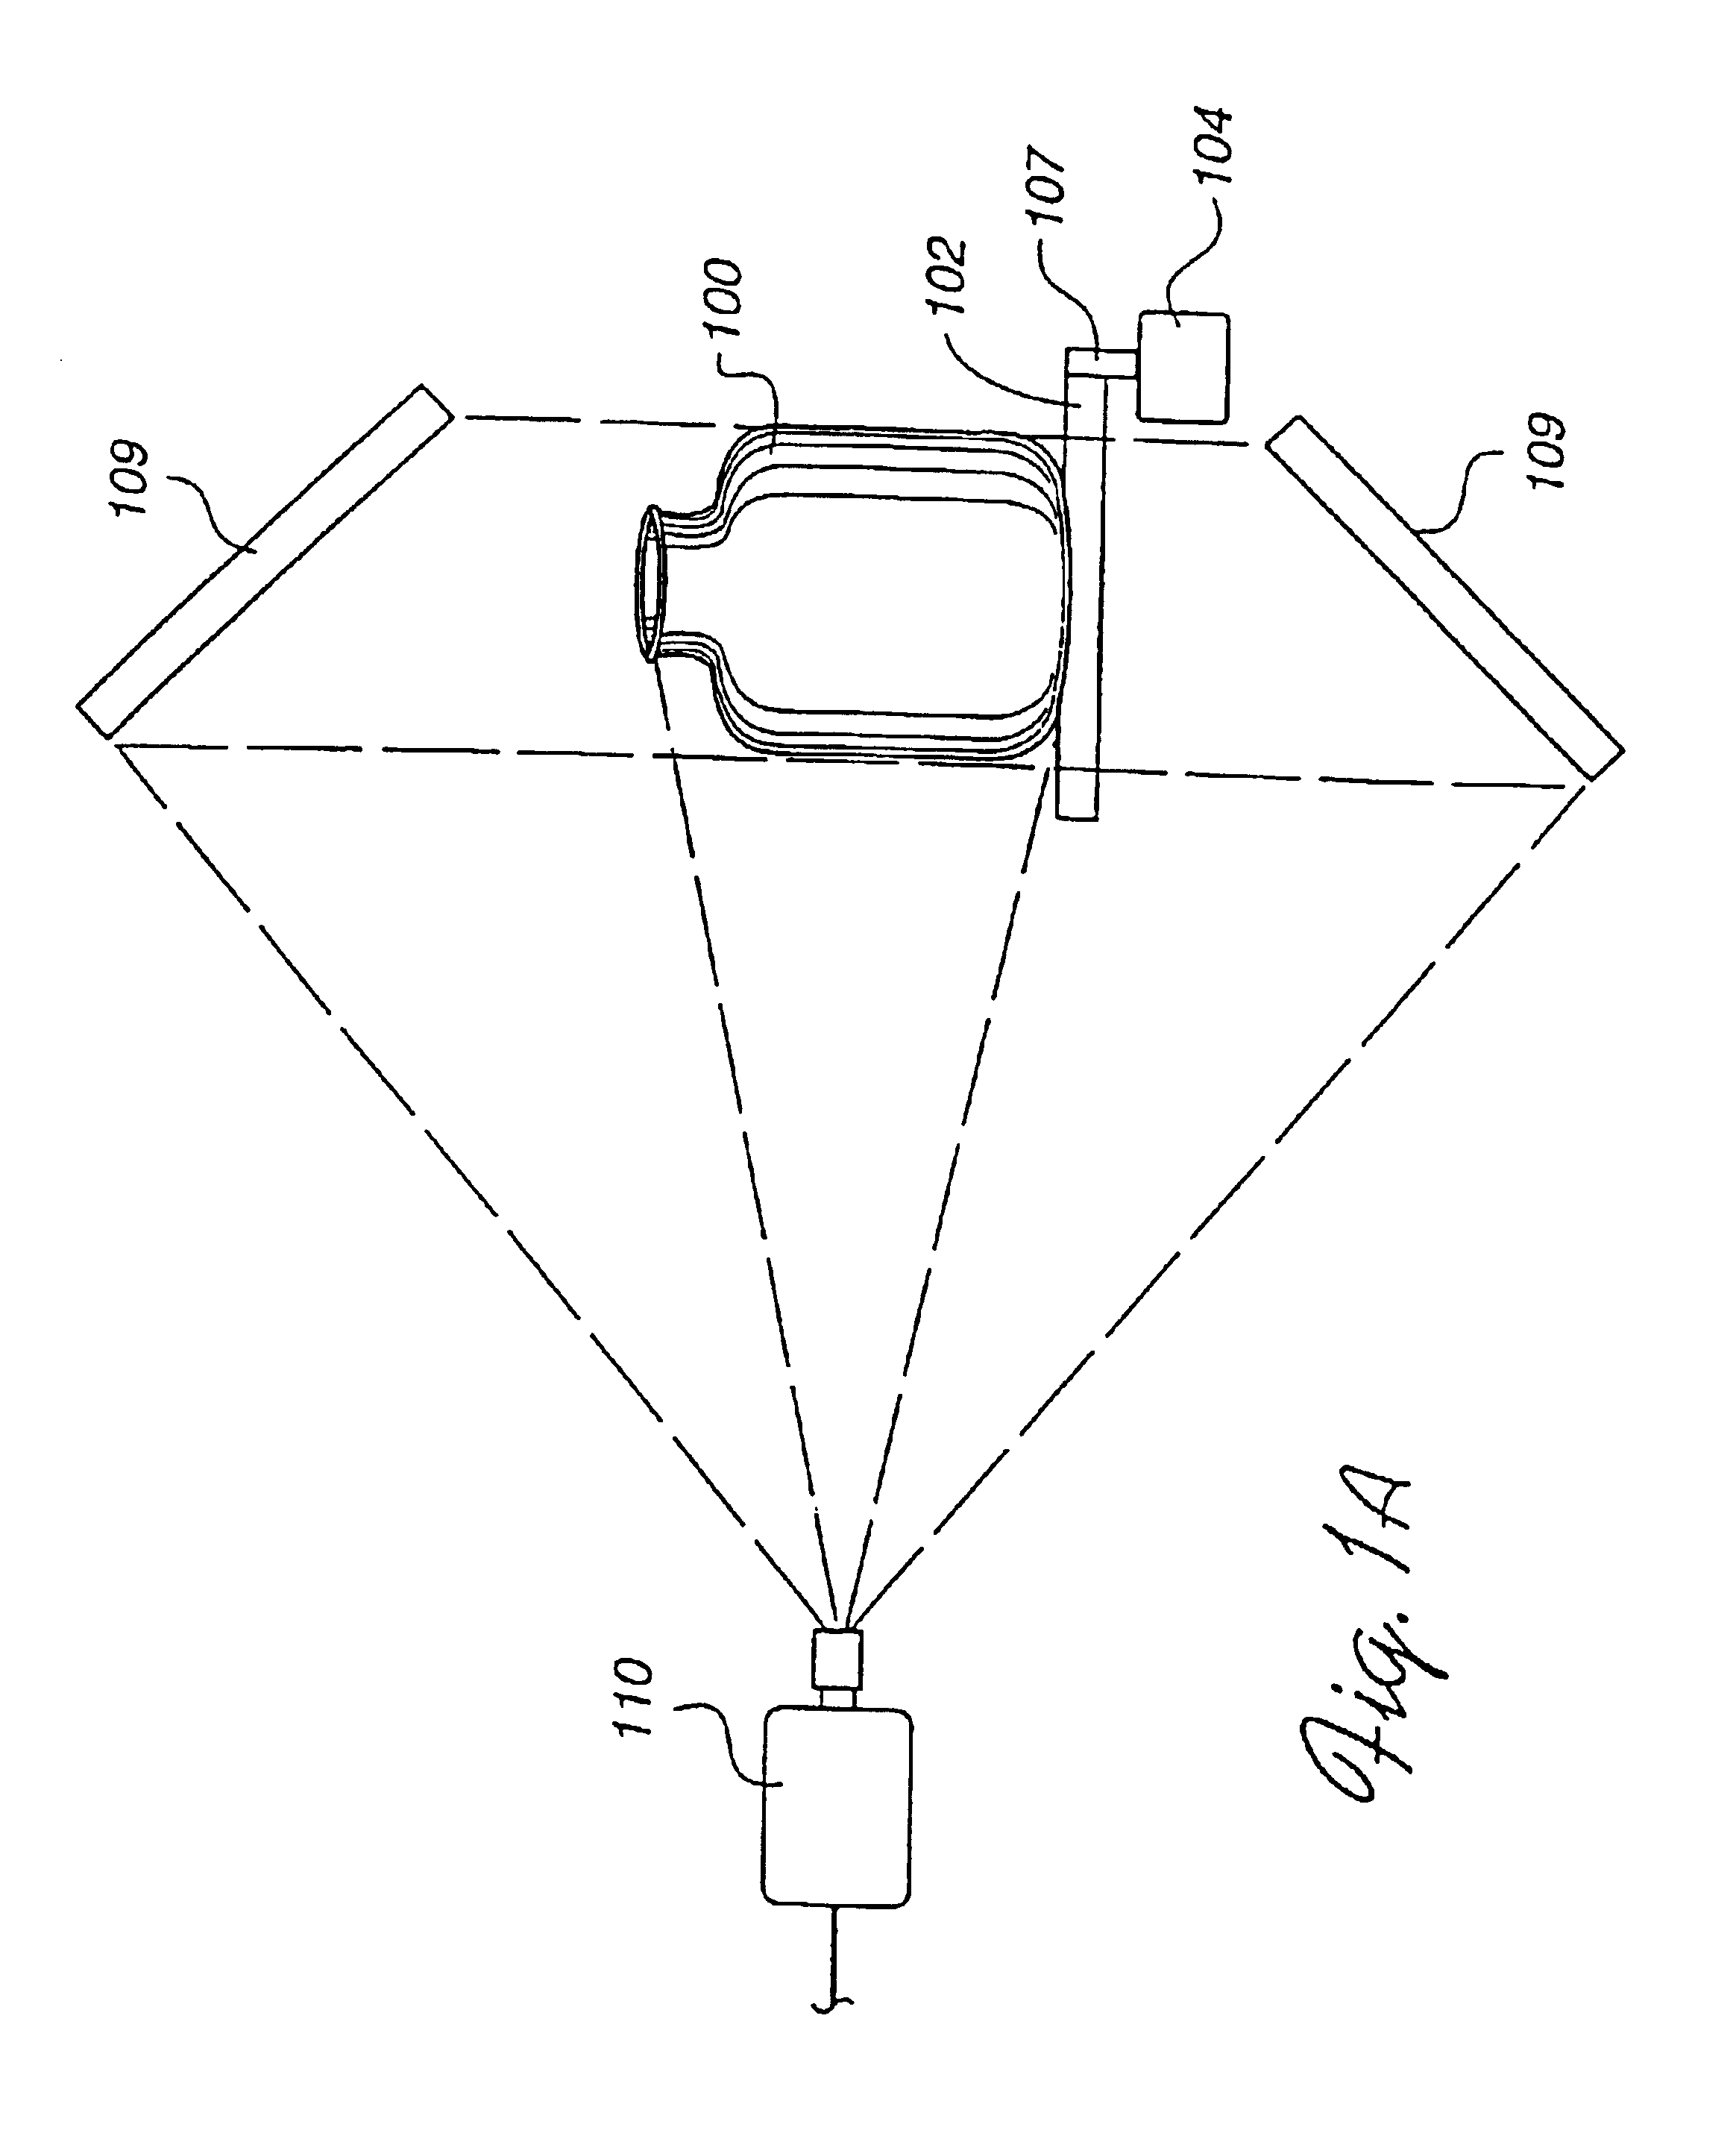 Method and apparatus for scanning three-dimensional objects